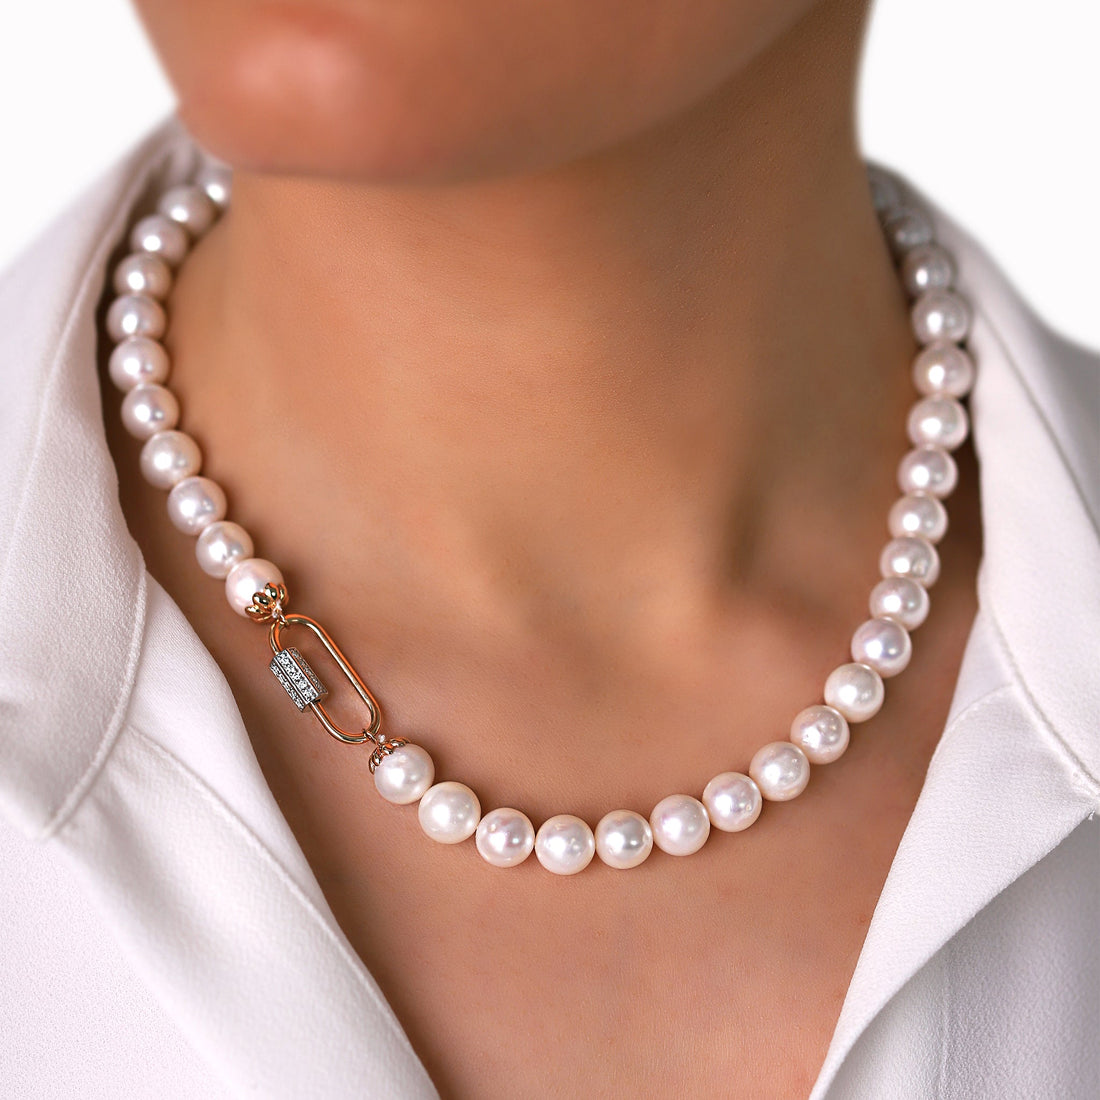 Jewelry Pearls | Diamond Necklace | 0.39 Cts. | 14K Gold - Rose / 43 Cm / Round Cut - necklace Zengoda Shop